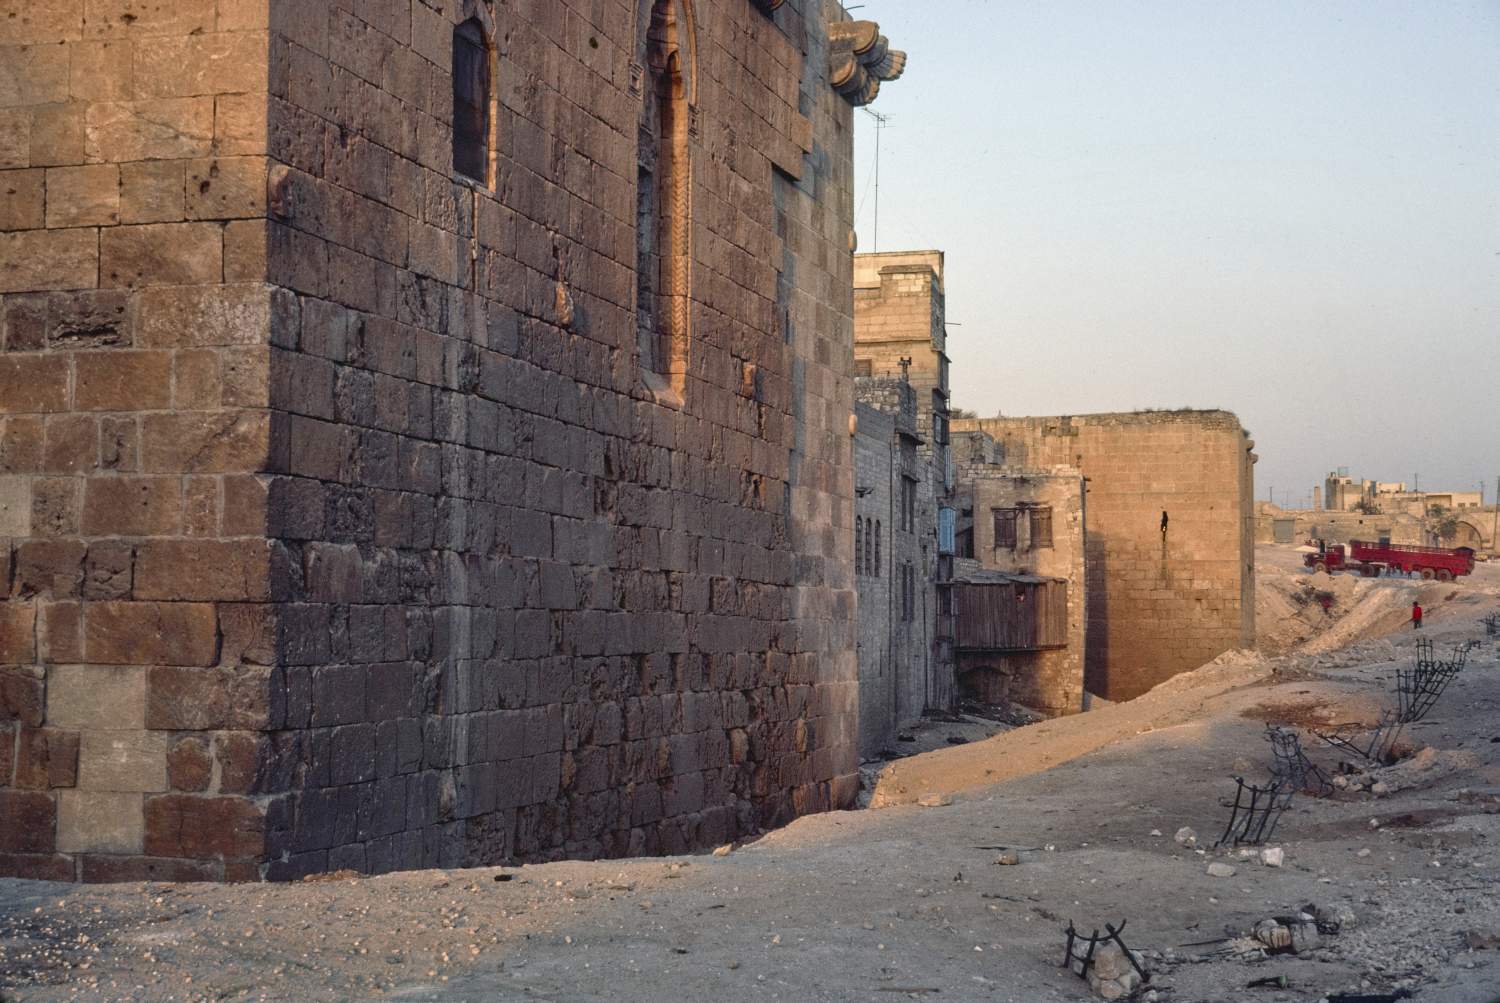 View of tower on southern face west of Bab Qinnasrin.